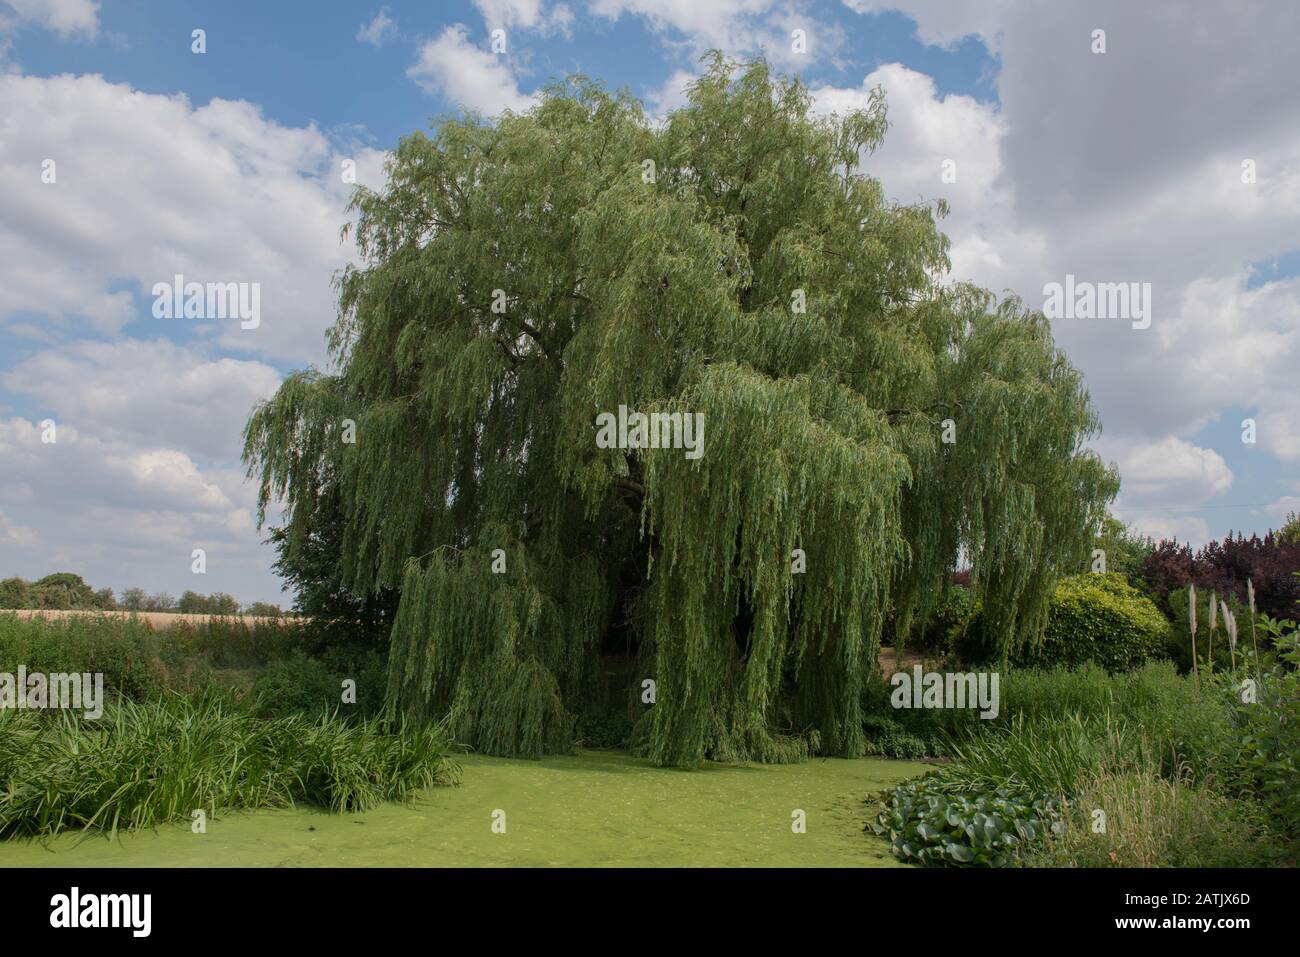 Weeping Willow Tree (Salix babylonica) by the Side of a Pond Covered with Duckweed in a Country Cottage Garden in Rural Warwickshire, England,UK Stock Photo